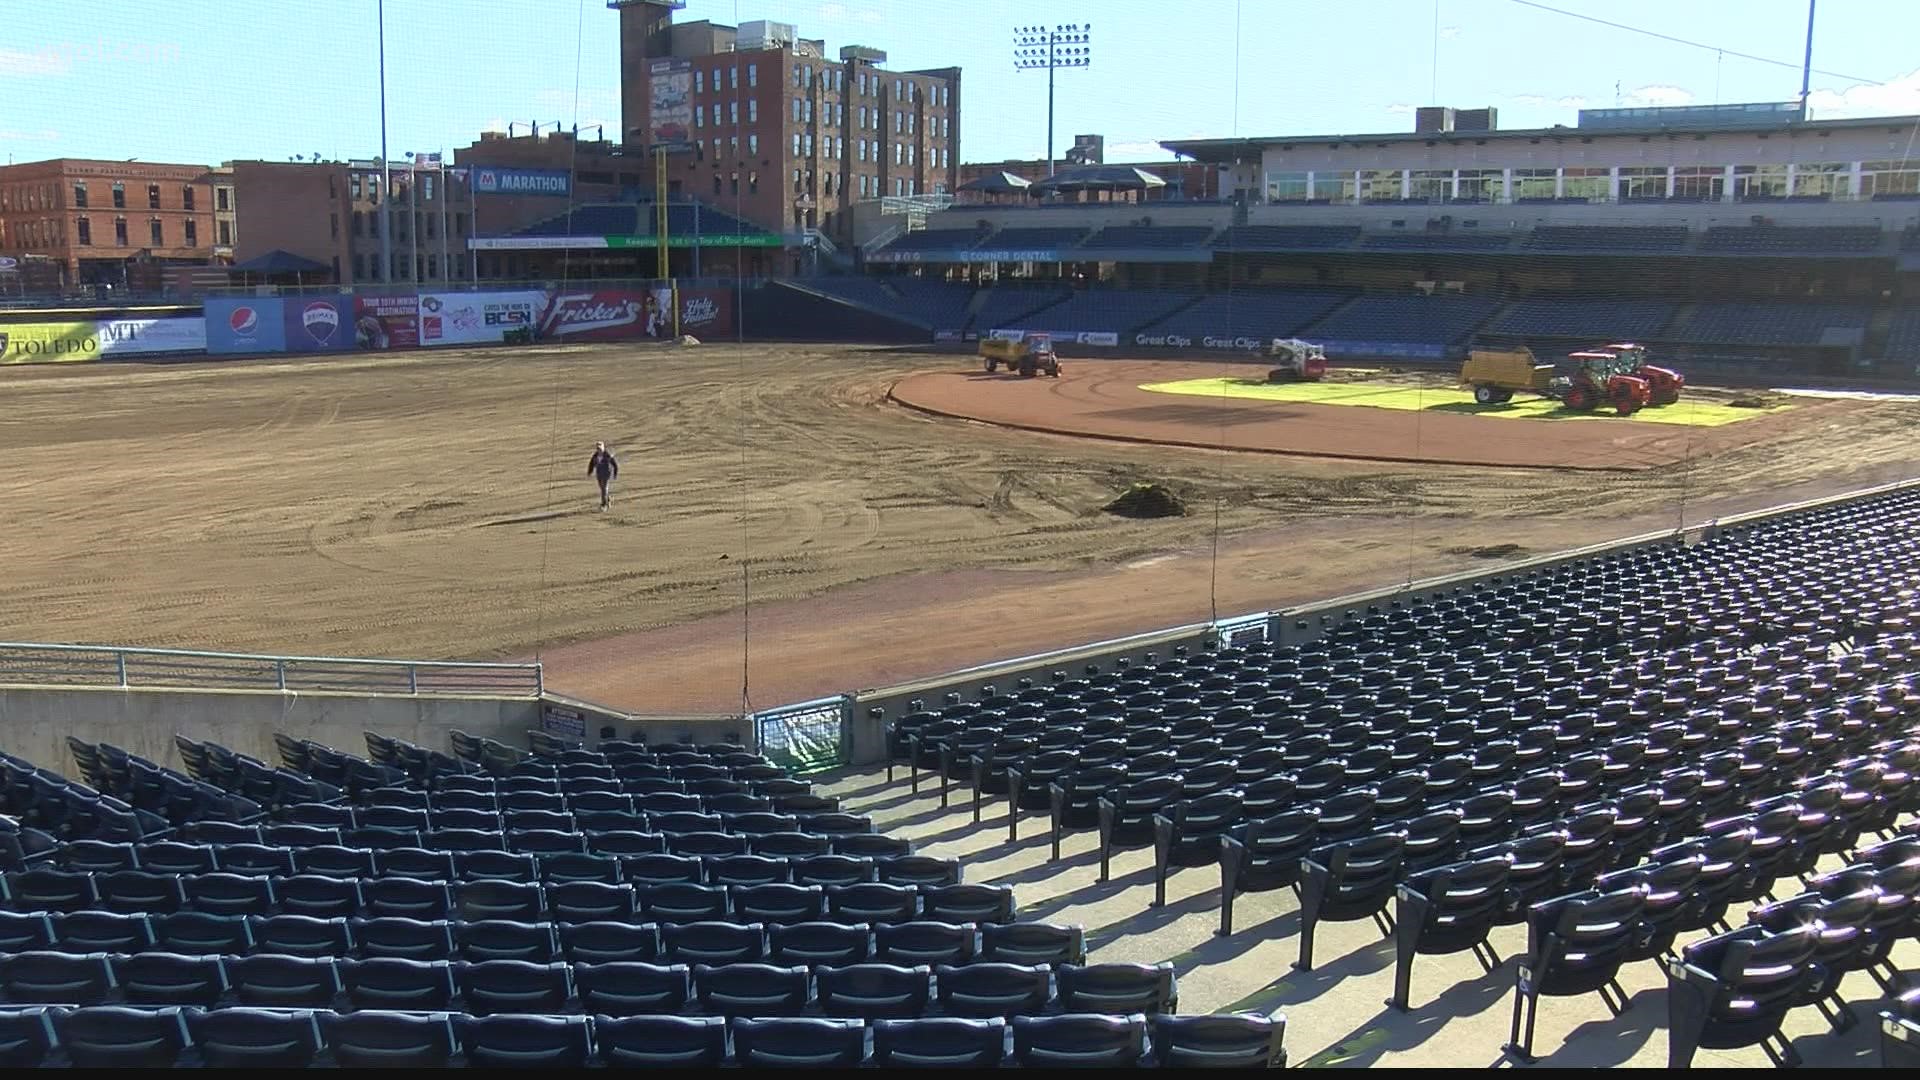 Crews are hard at work to prepare the home of the Mud Hens for an outdoor hockey rink for the Toledo Walleye Winterfest.